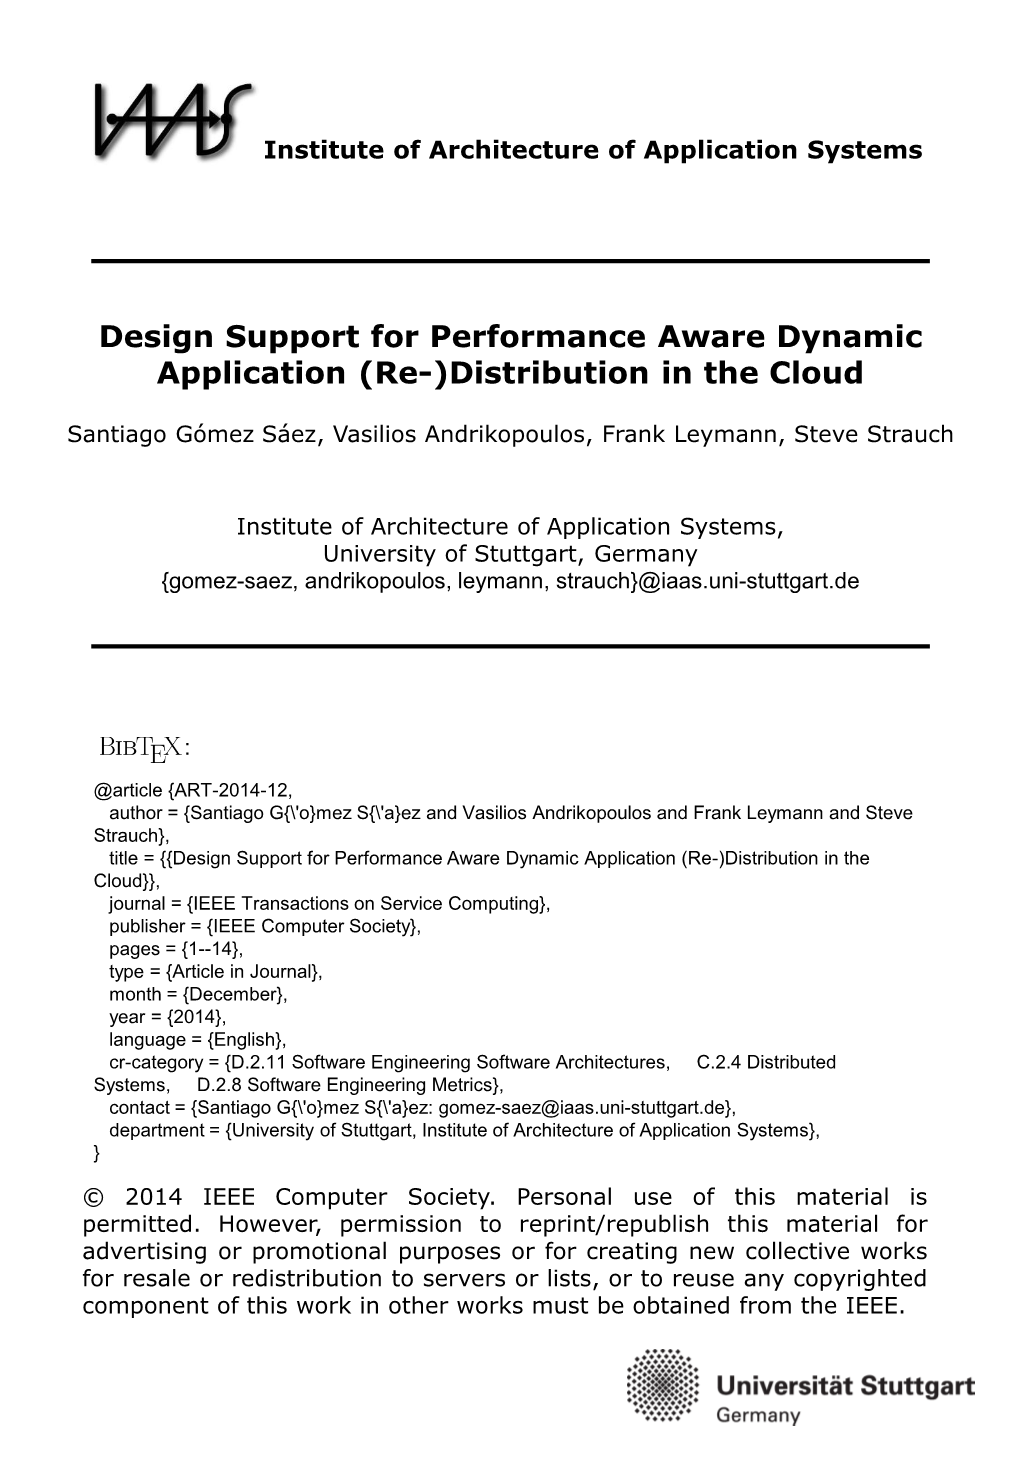 Design Support for Performance Aware Dynamic Application (Re-)Distribution in the Cloud